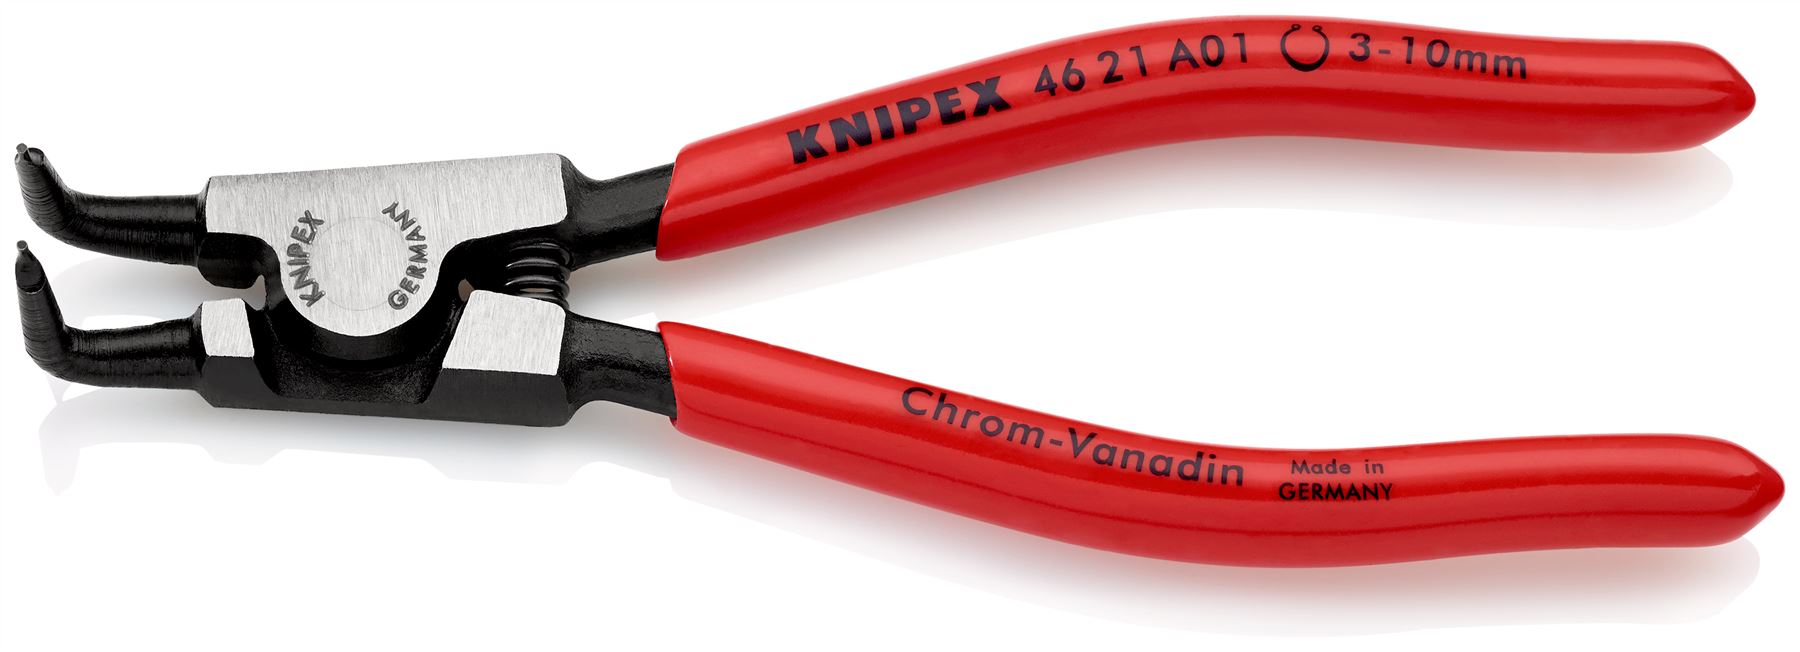 KNIPEX Circlip Pliers for External Circlips on Shafts 90° Angled 125mm 0.9mm Diameter Tips 46 21 A01